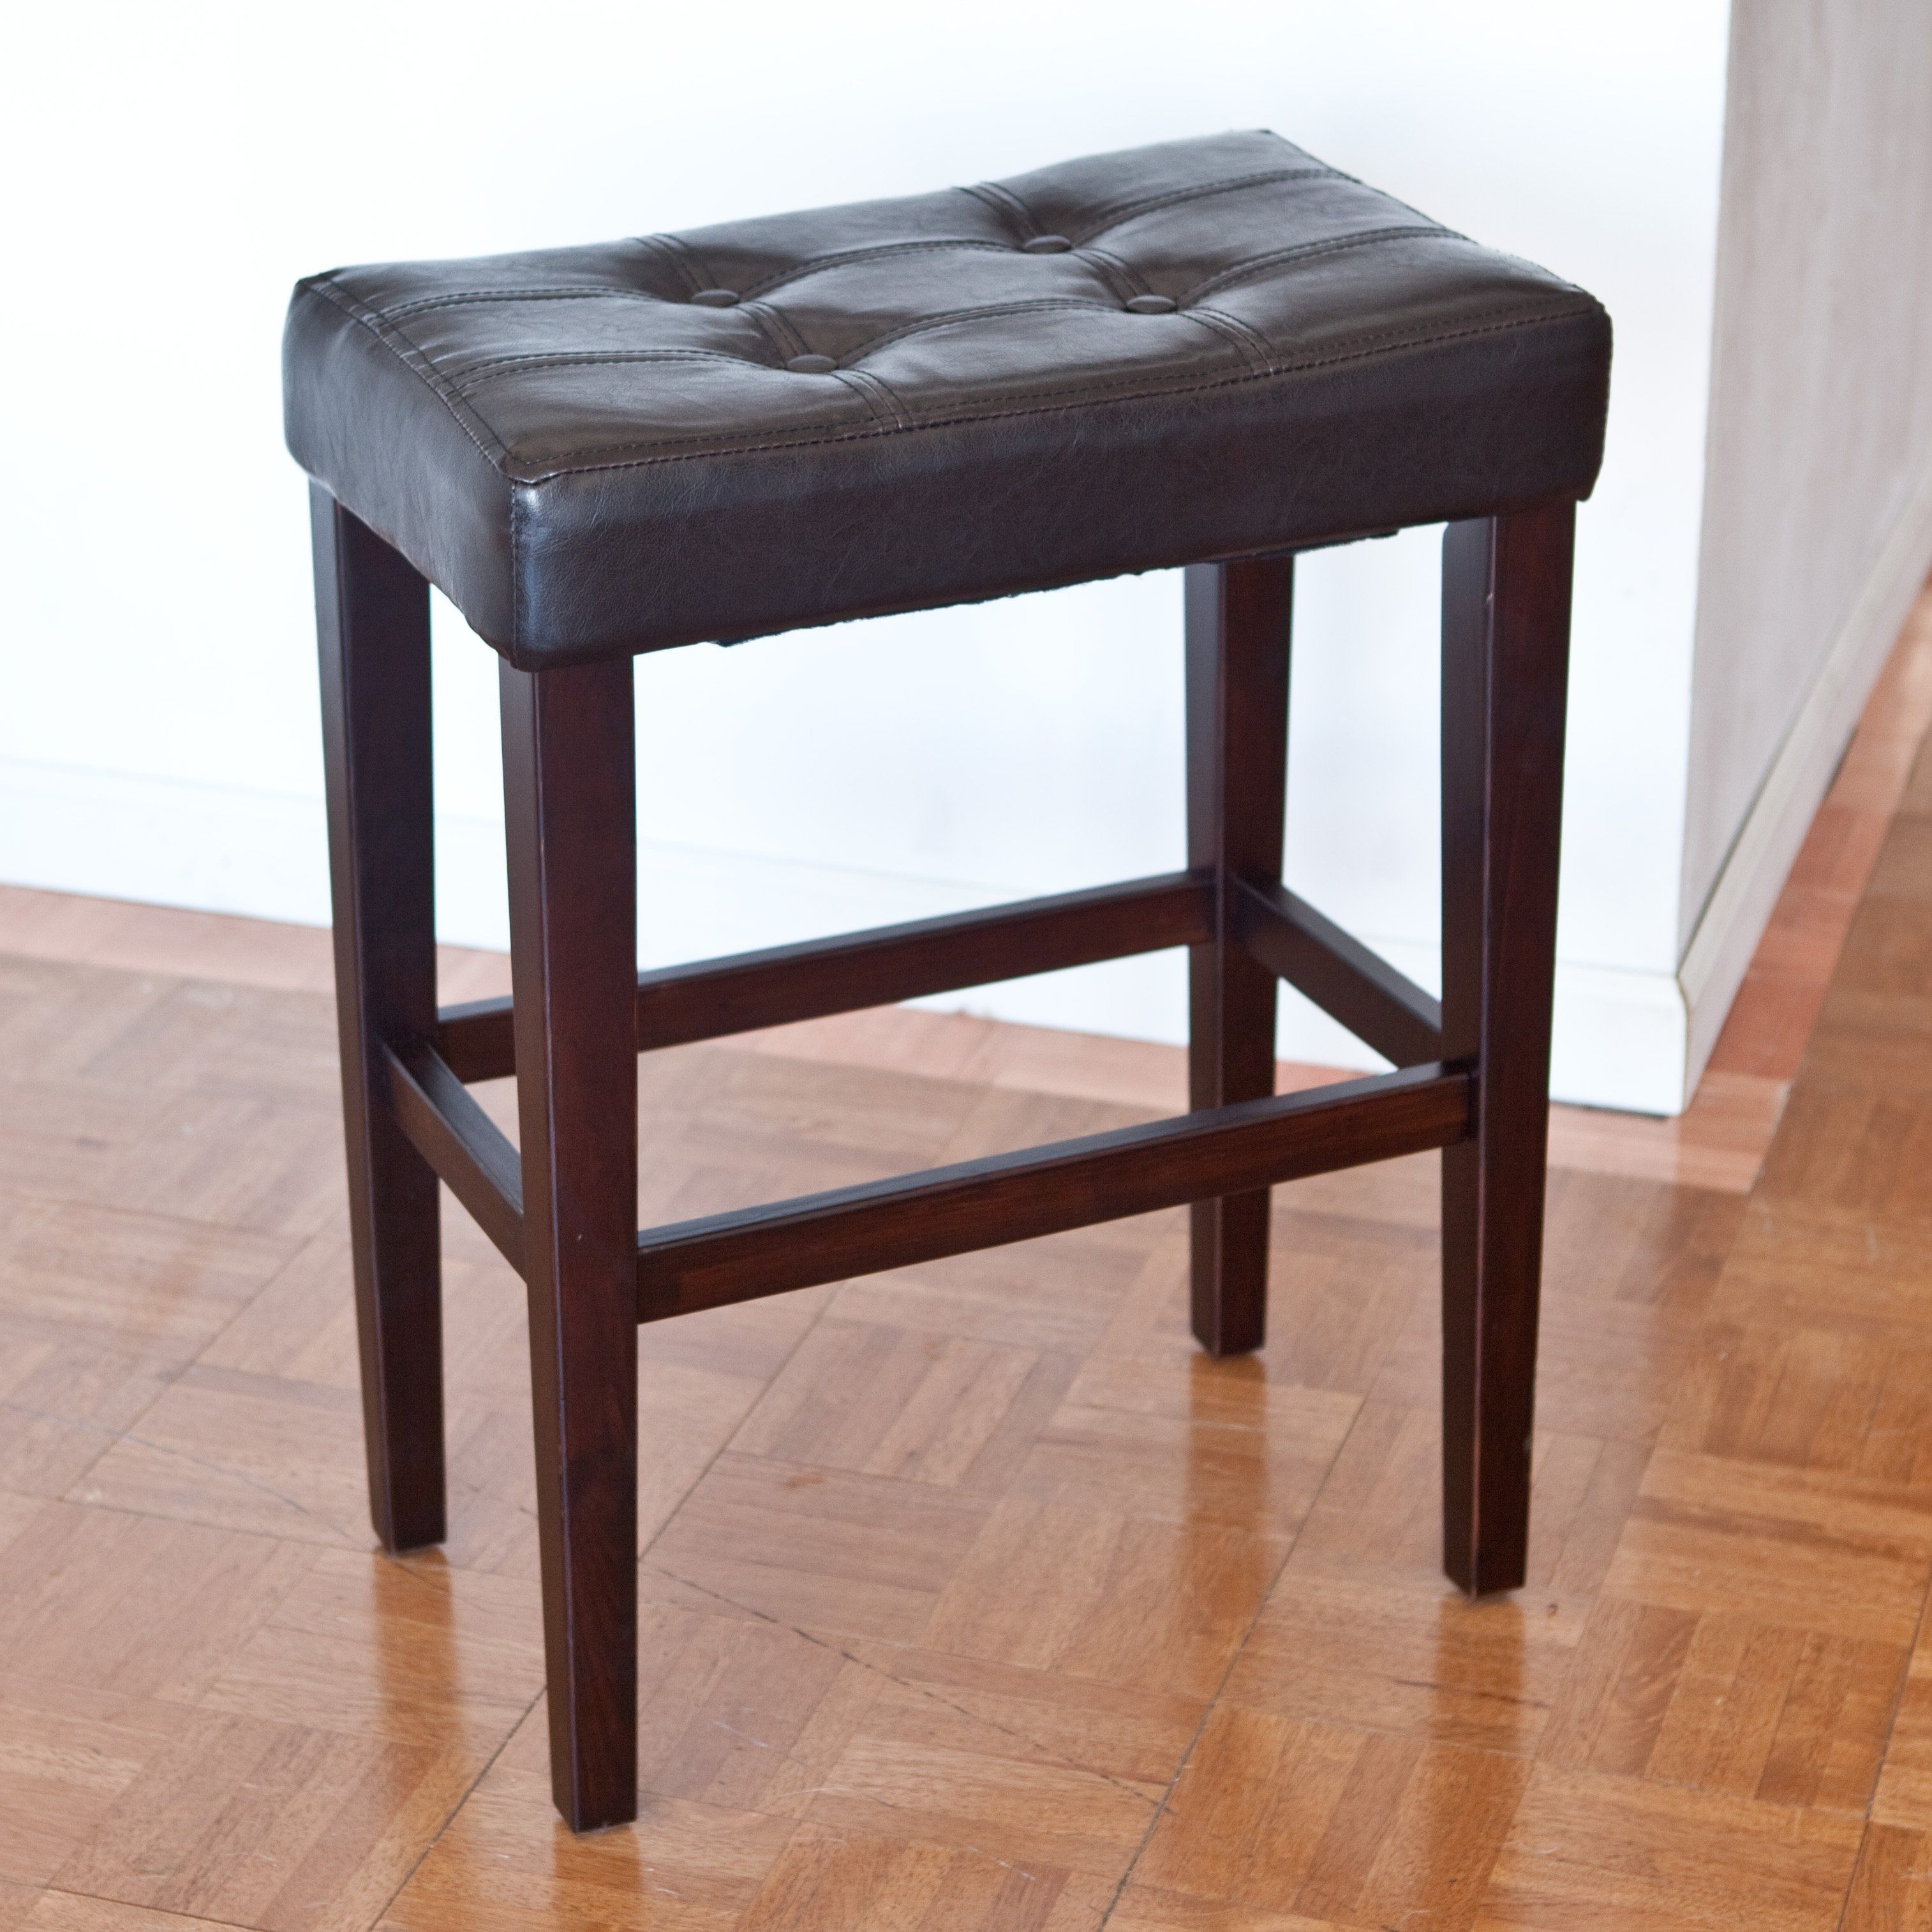 Palazzo 26 Inch Saddle Counter Stool – Brown | Hayneedle Pertaining To Palazzo 87 Inch Sideboards (View 25 of 30)